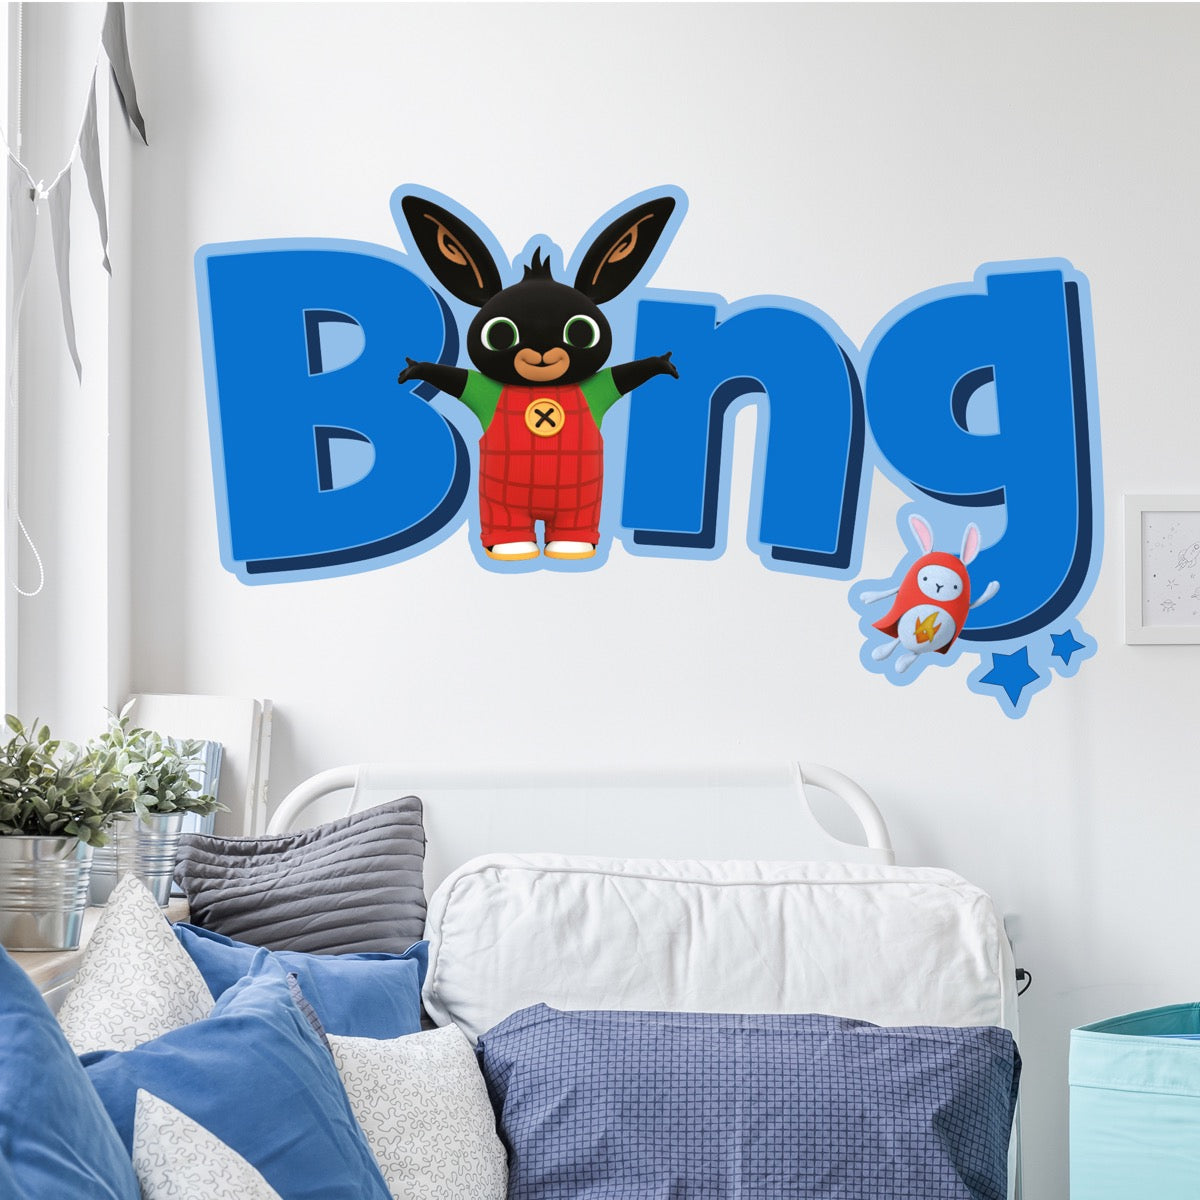 Bing Wall Sticker - Bing and His Name Wall Decal